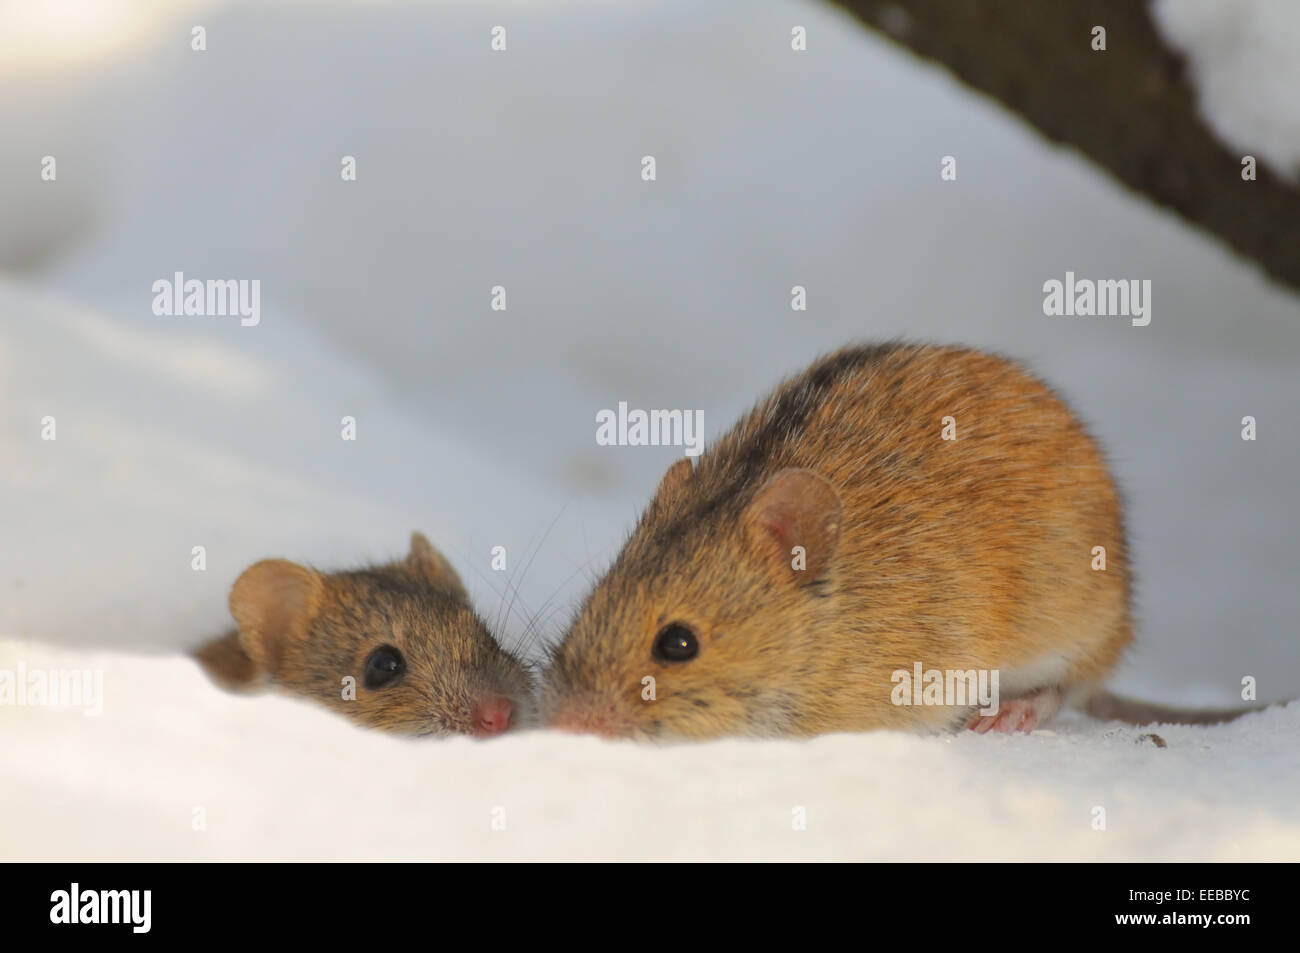 Couple of kissing mice in snow. Stock Photo